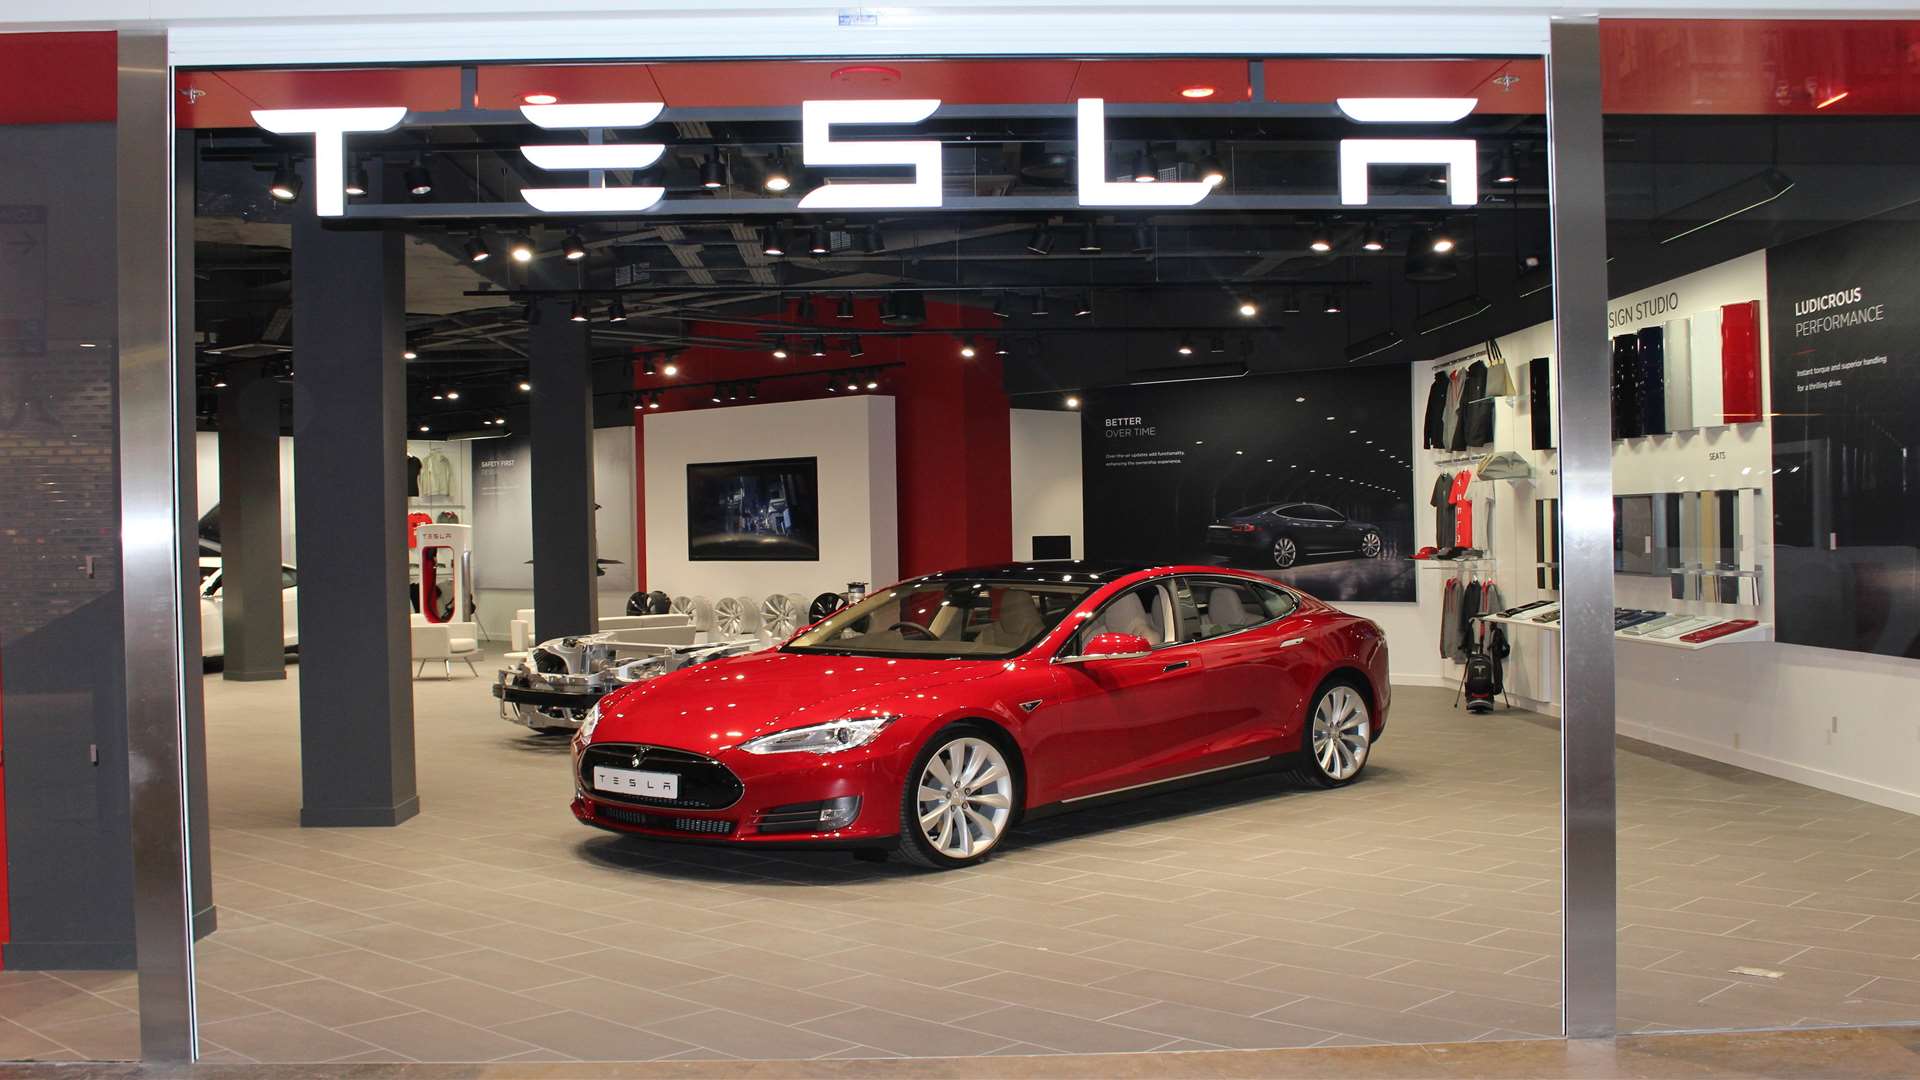 Tesla has a store at Bluewater